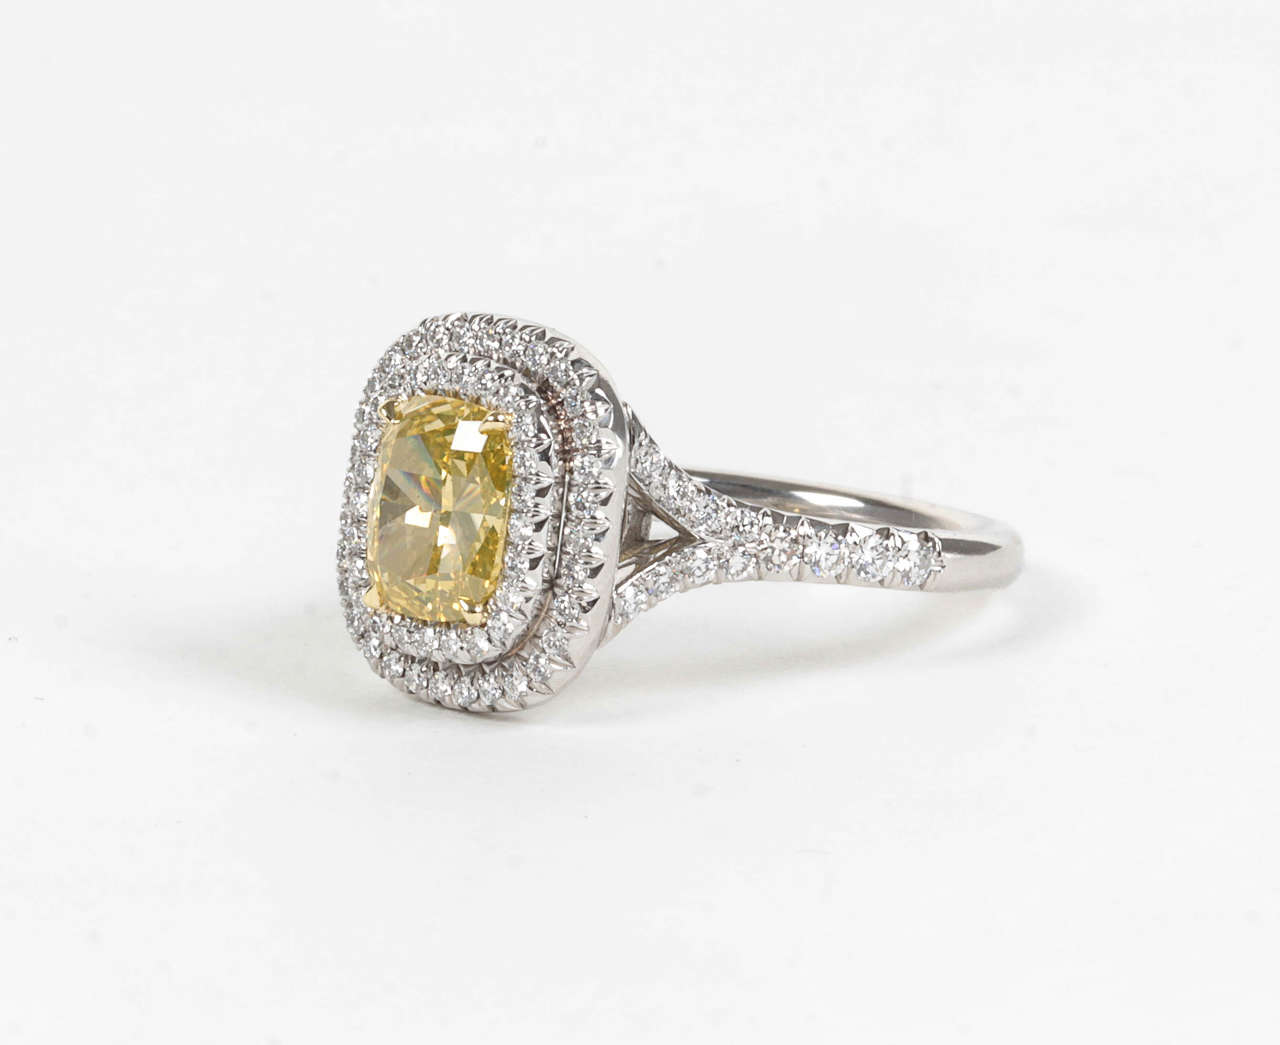 1.54 carat GIA Certified vivid yellow VS2 cushion cut center diamond.

The center diamond is set in a handmade platinum and diamond mounting featuring 0.80 carats of round brilliant cut white diamonds.

A beautiful engagement or cocktail ring to